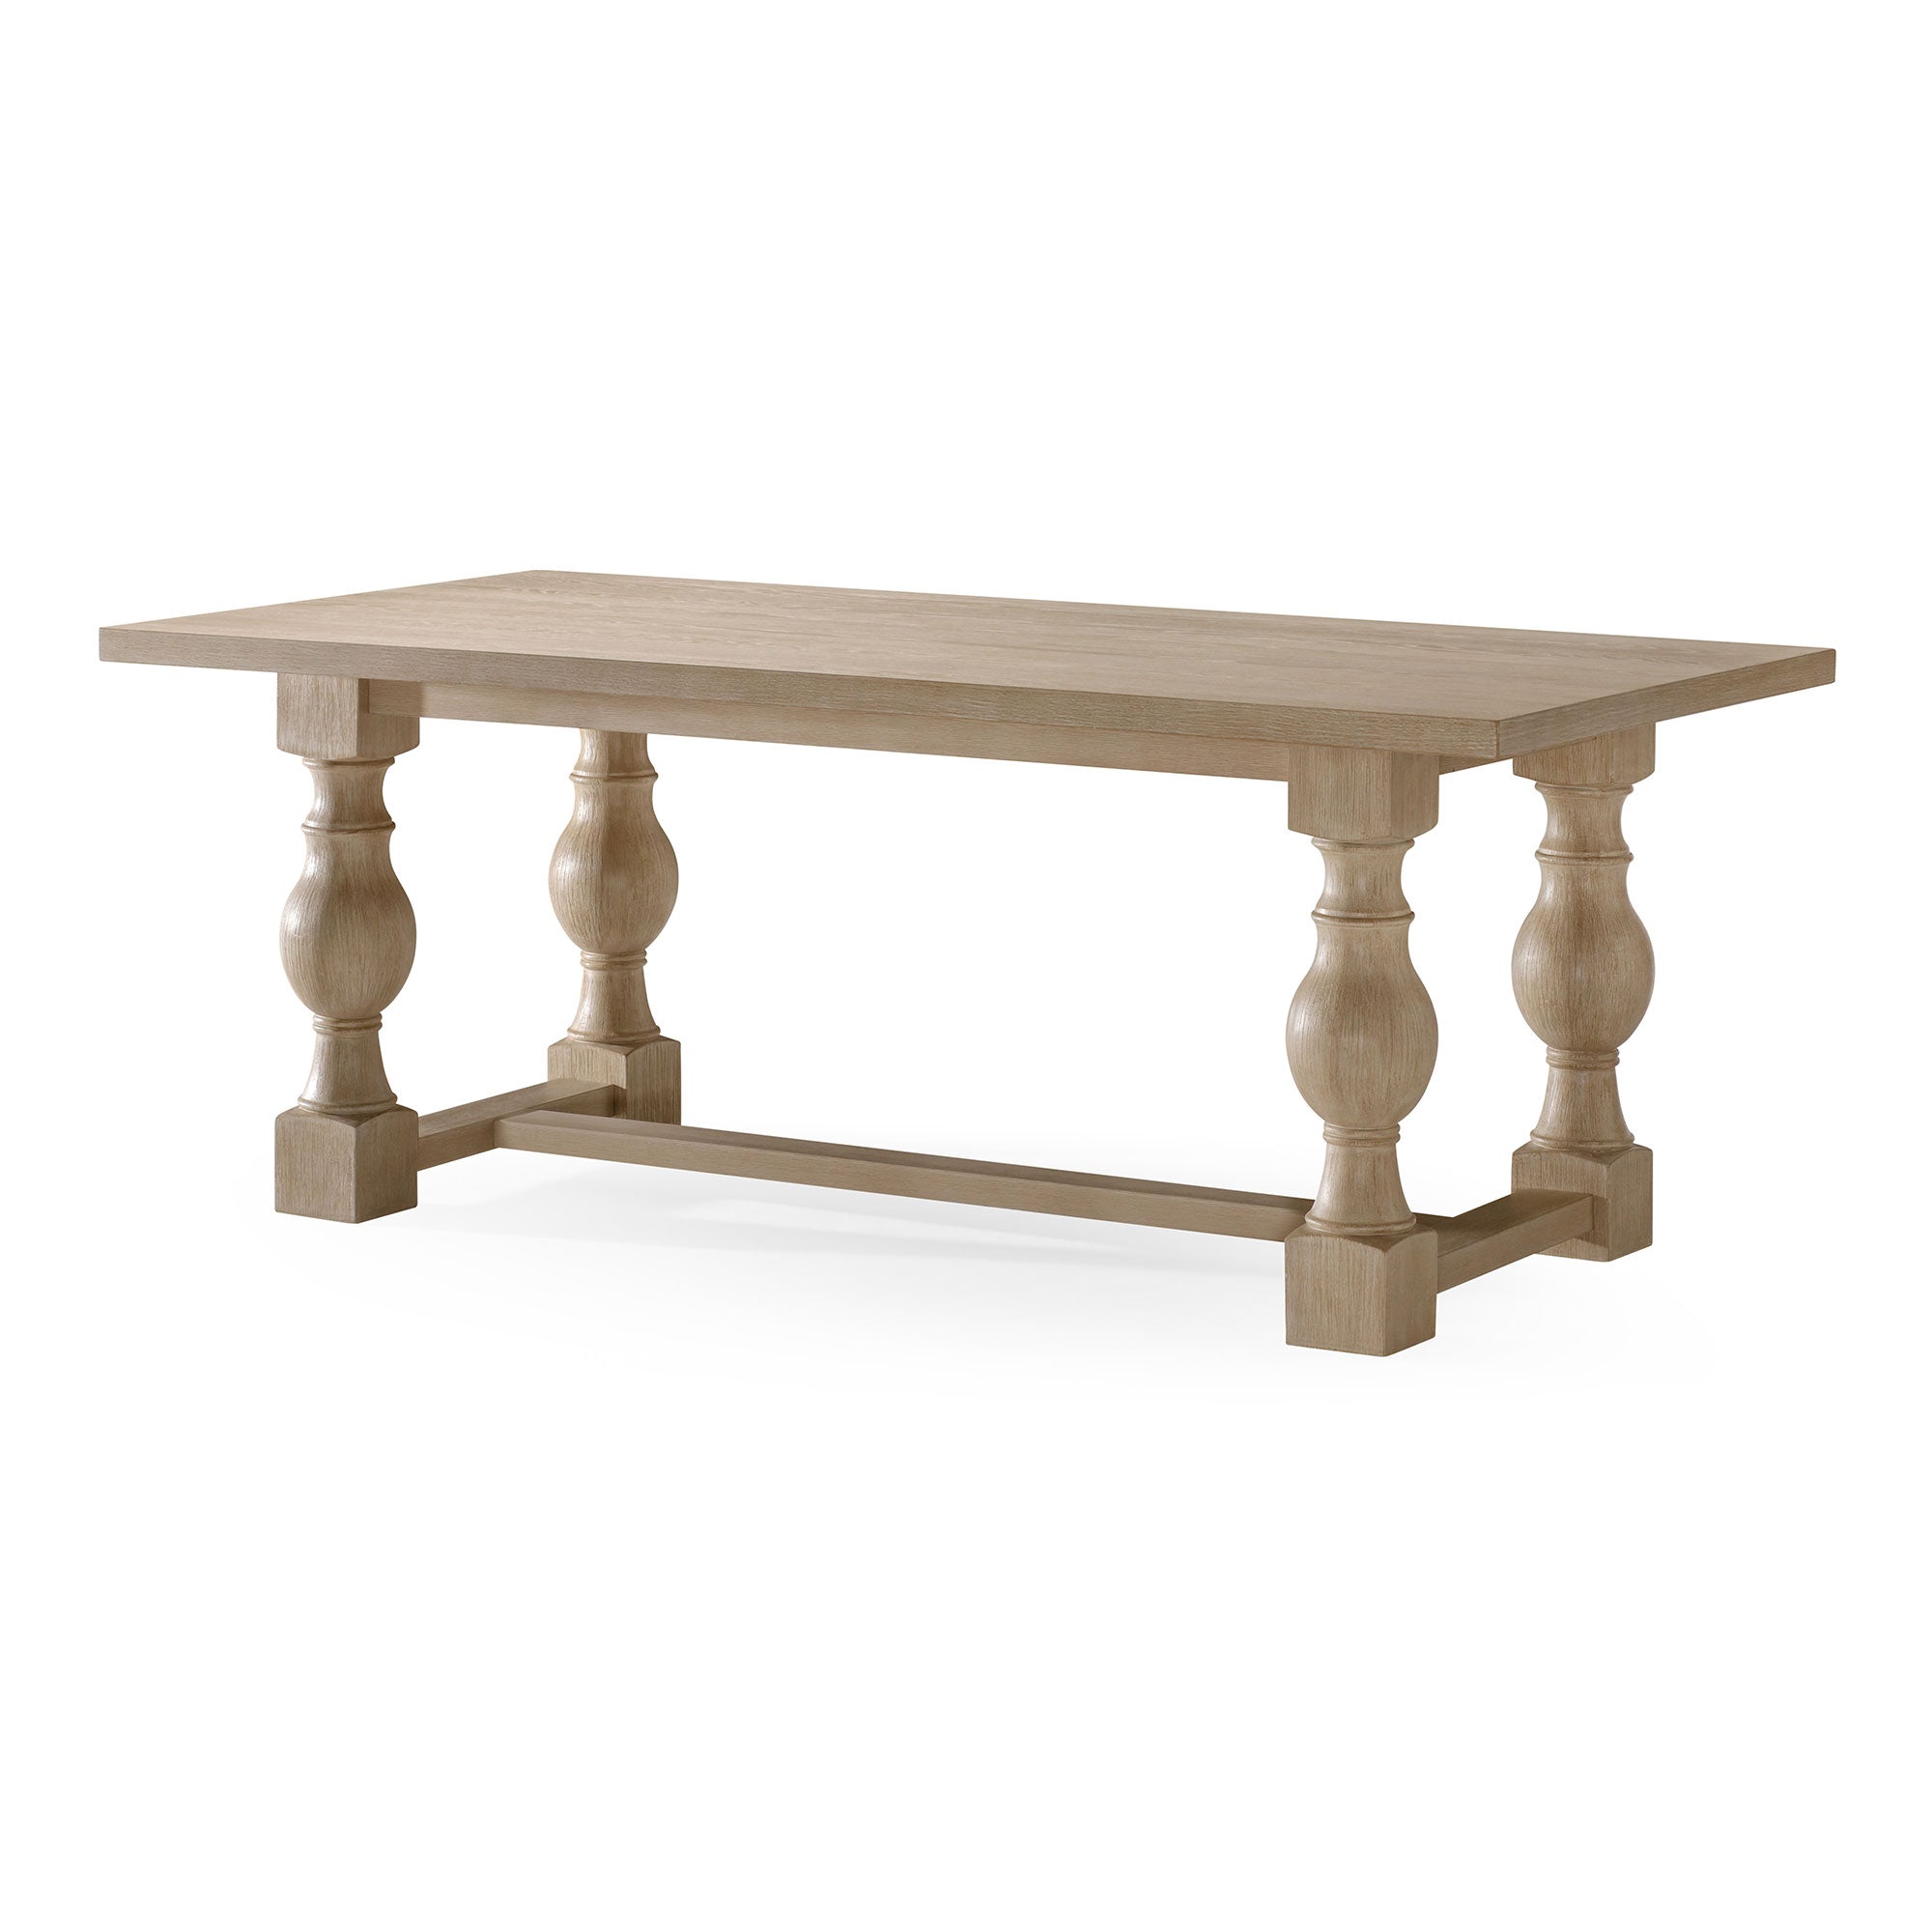 Leon Classical Wooden Dining Table in Antiqued White Finish in Dining Furniture by Maven Lane